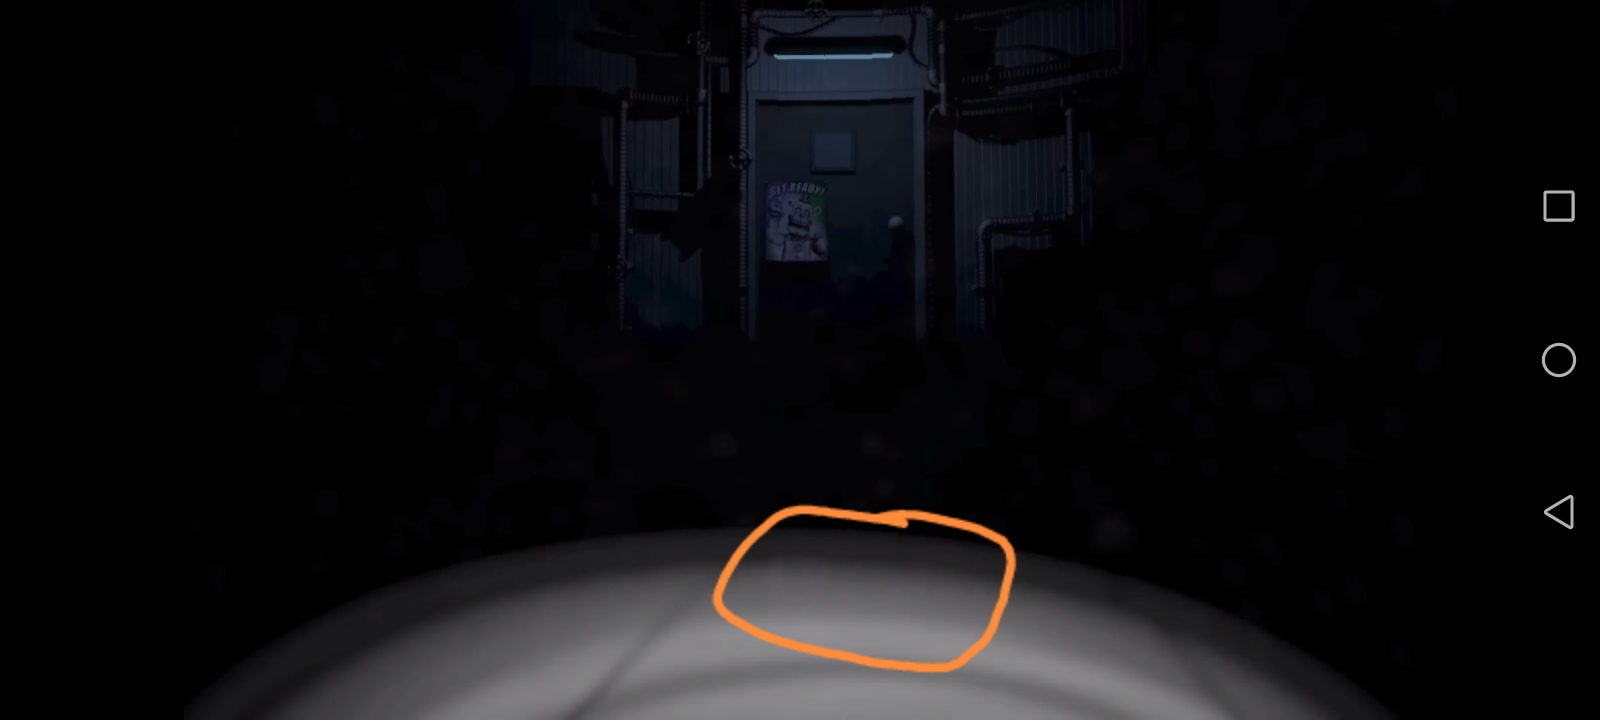 Fun Fact Did You Know That In Ballora Gallery When You Are Going Into The Breaker Room You Can 3010